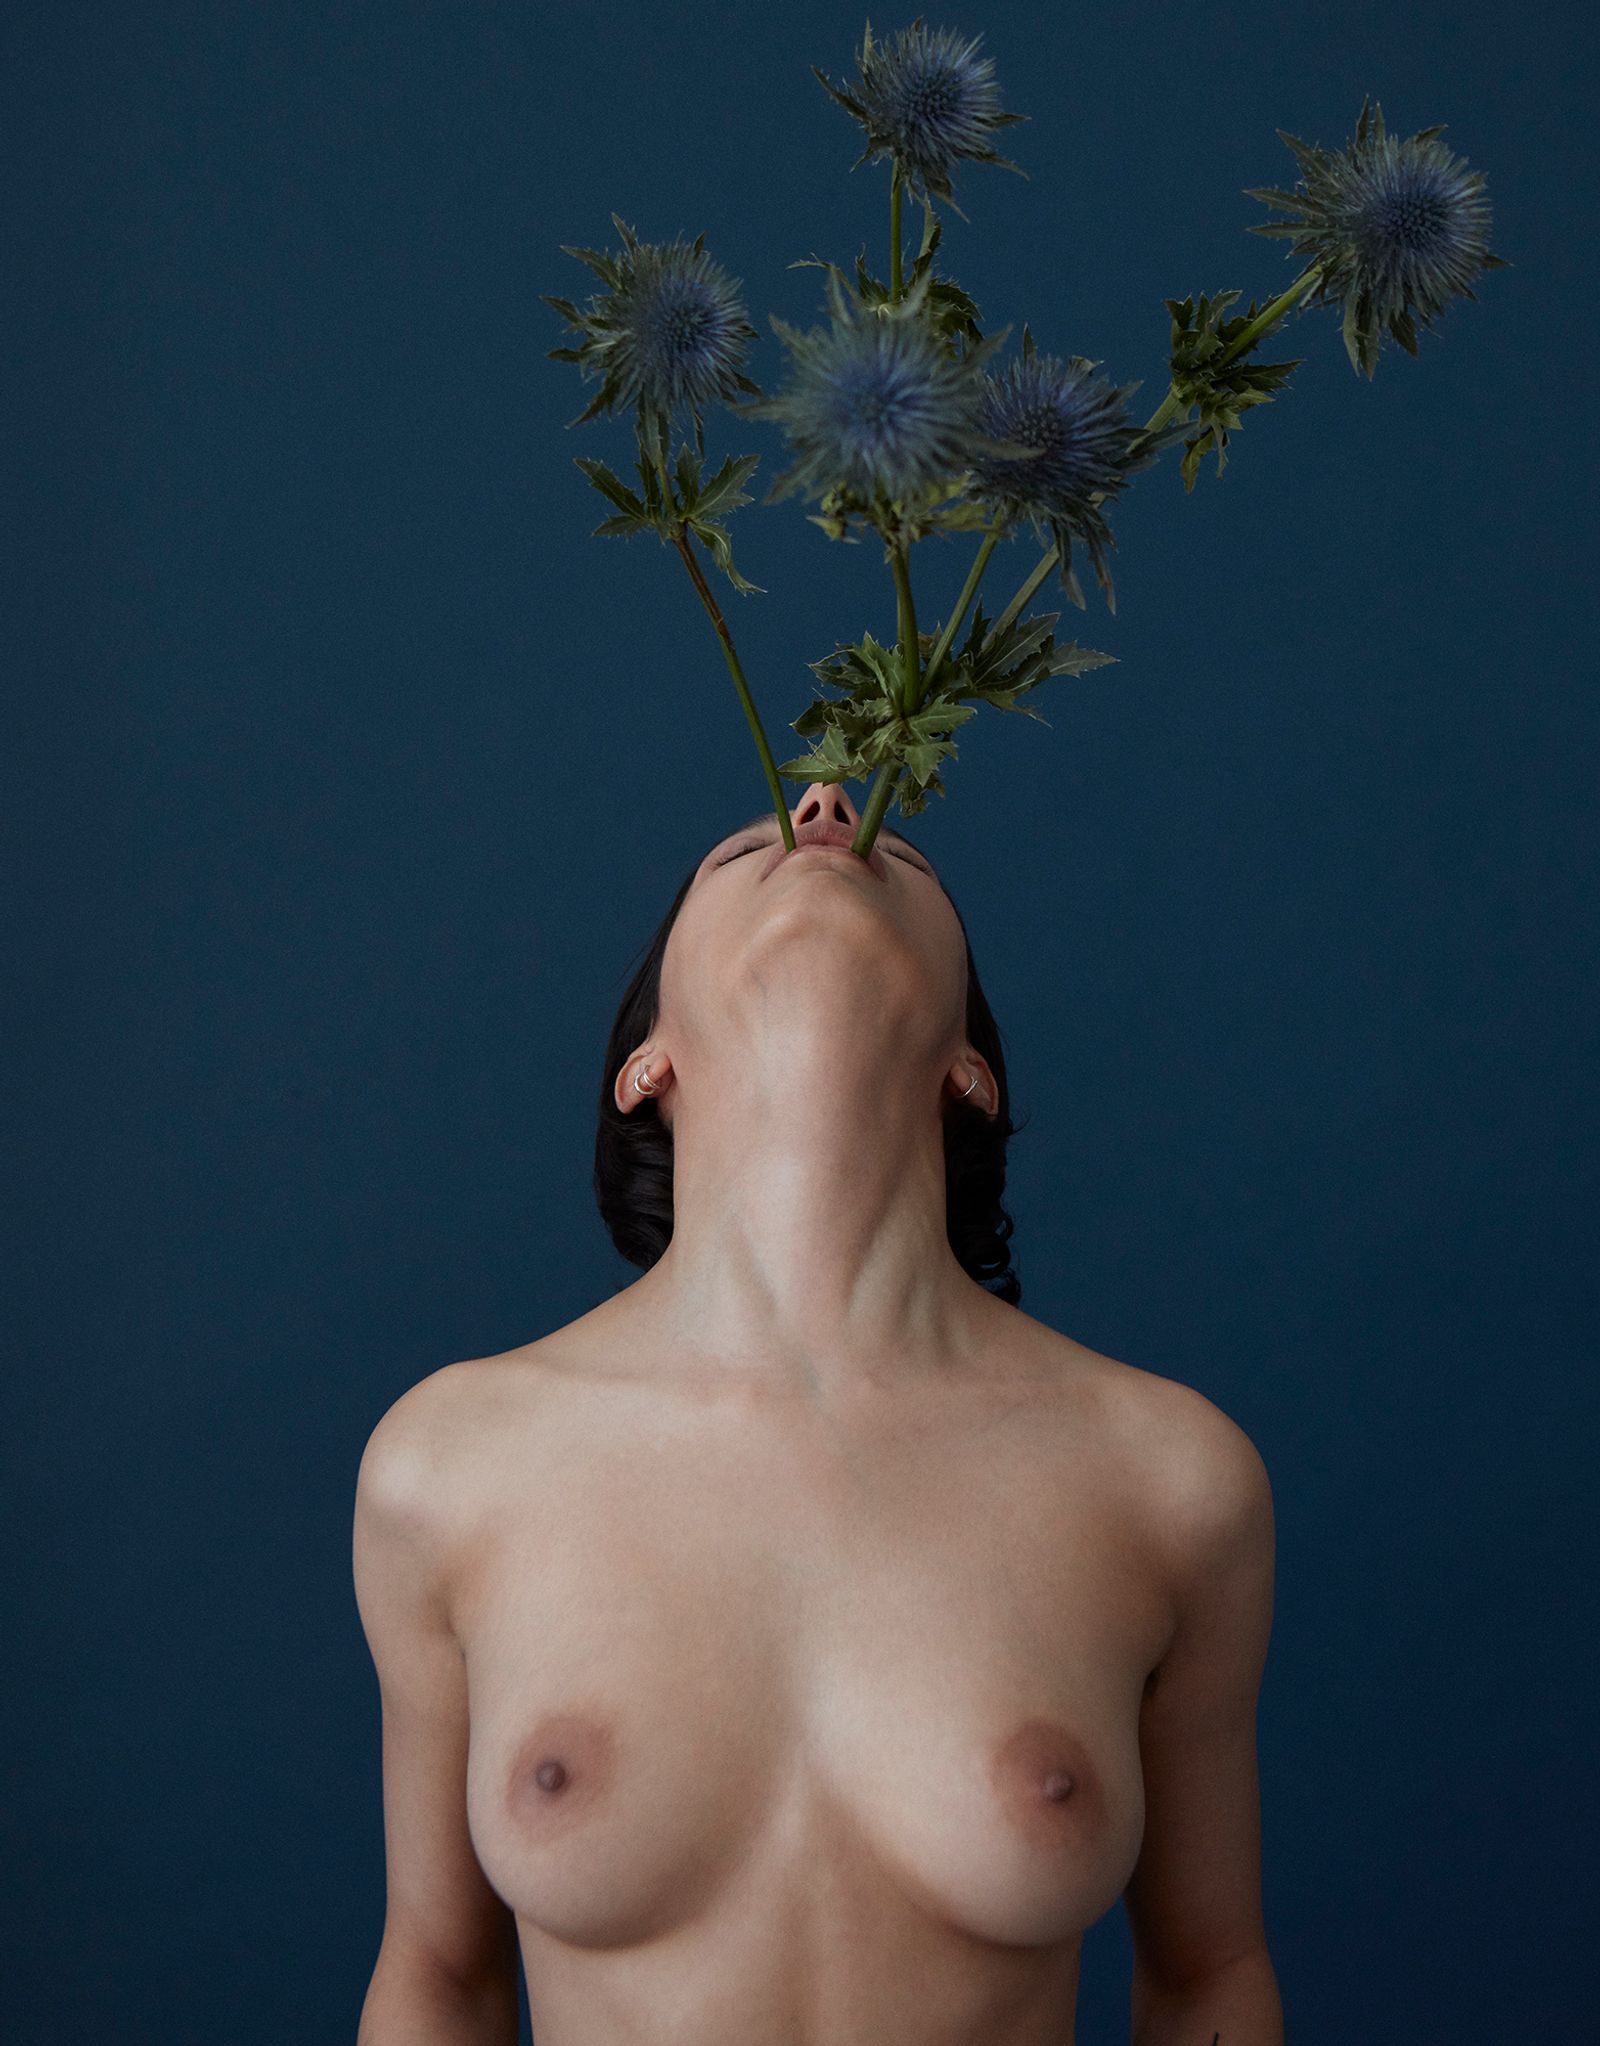 © Patricia Reyes - Image from the I will touch a hundred flowers and not pick one photography project